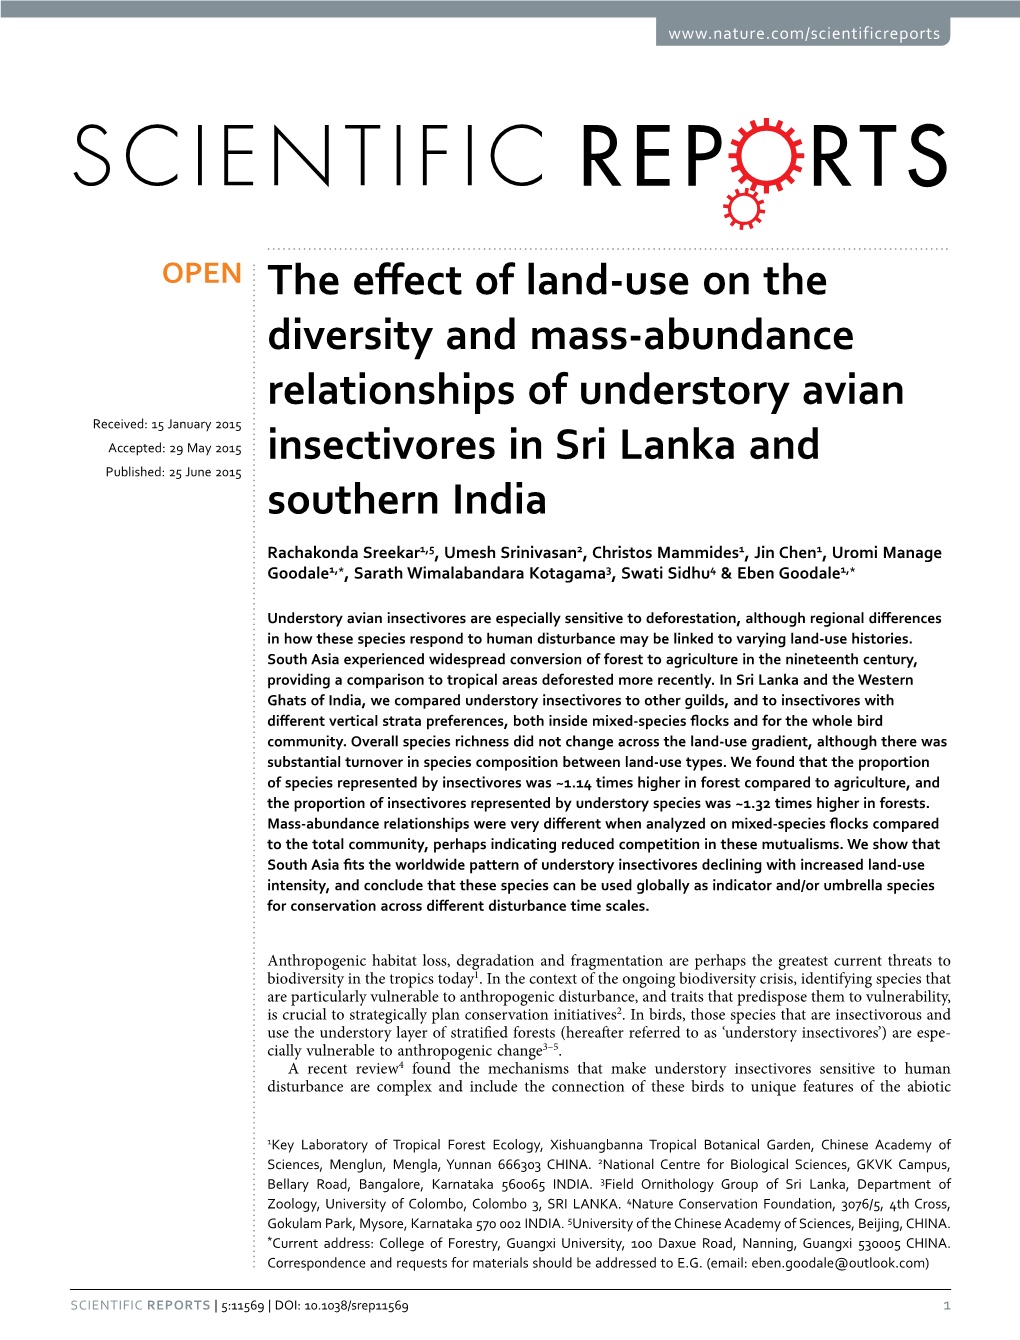 The Effect of Land-Use on the Diversity and Mass-Abundance Relationships